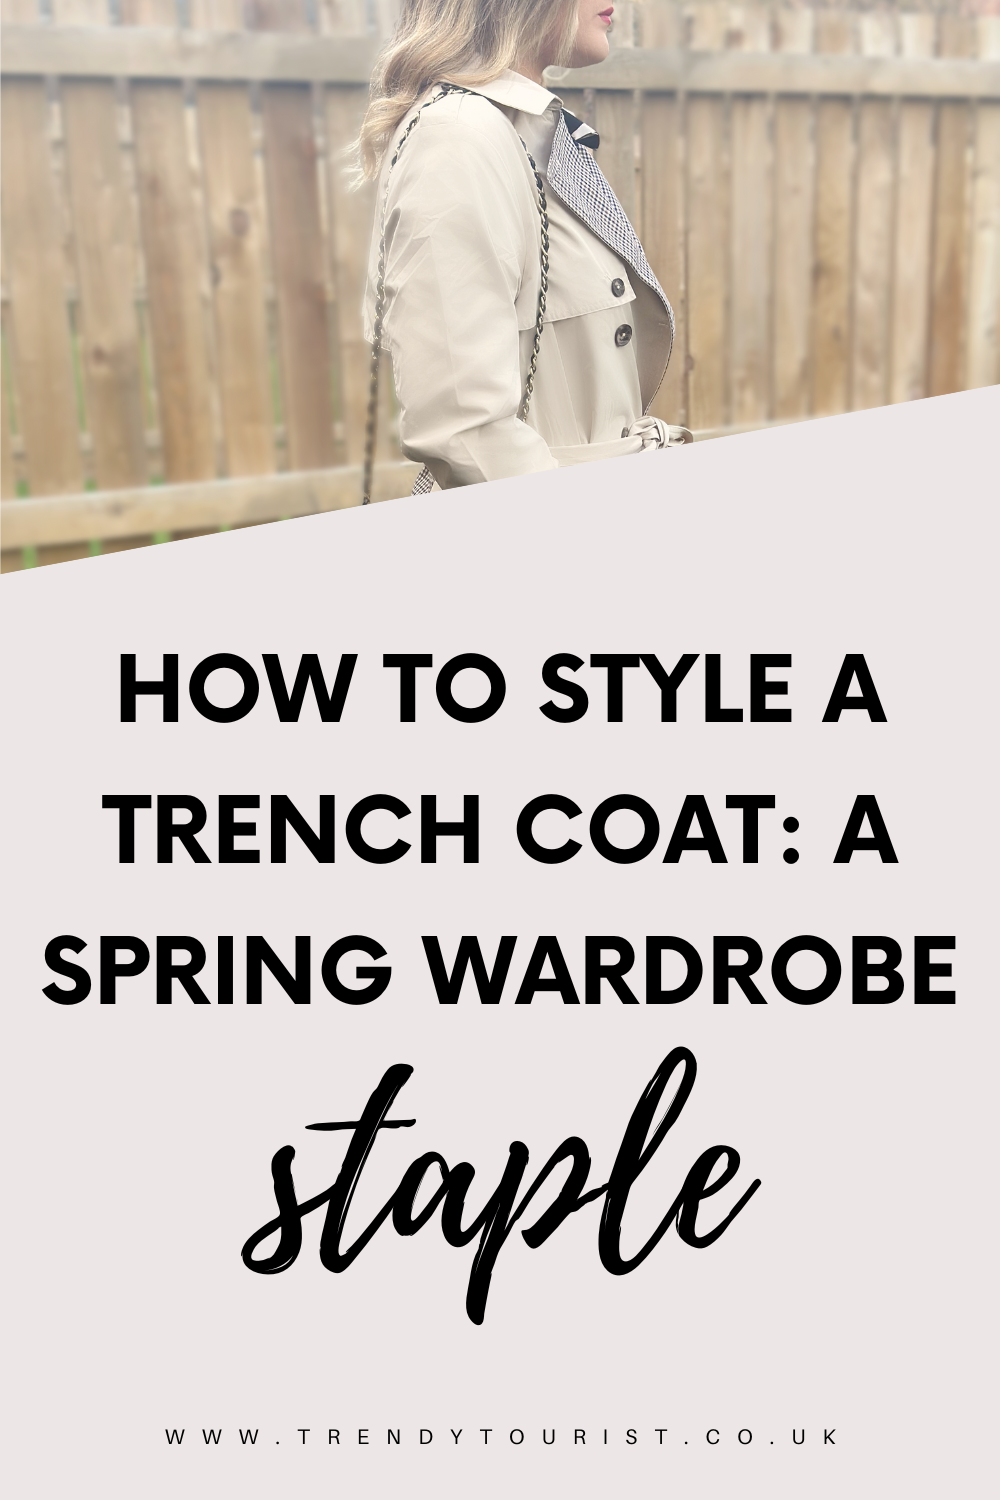 How to Style a Trench Coat: A Spring Wardrobe Staple